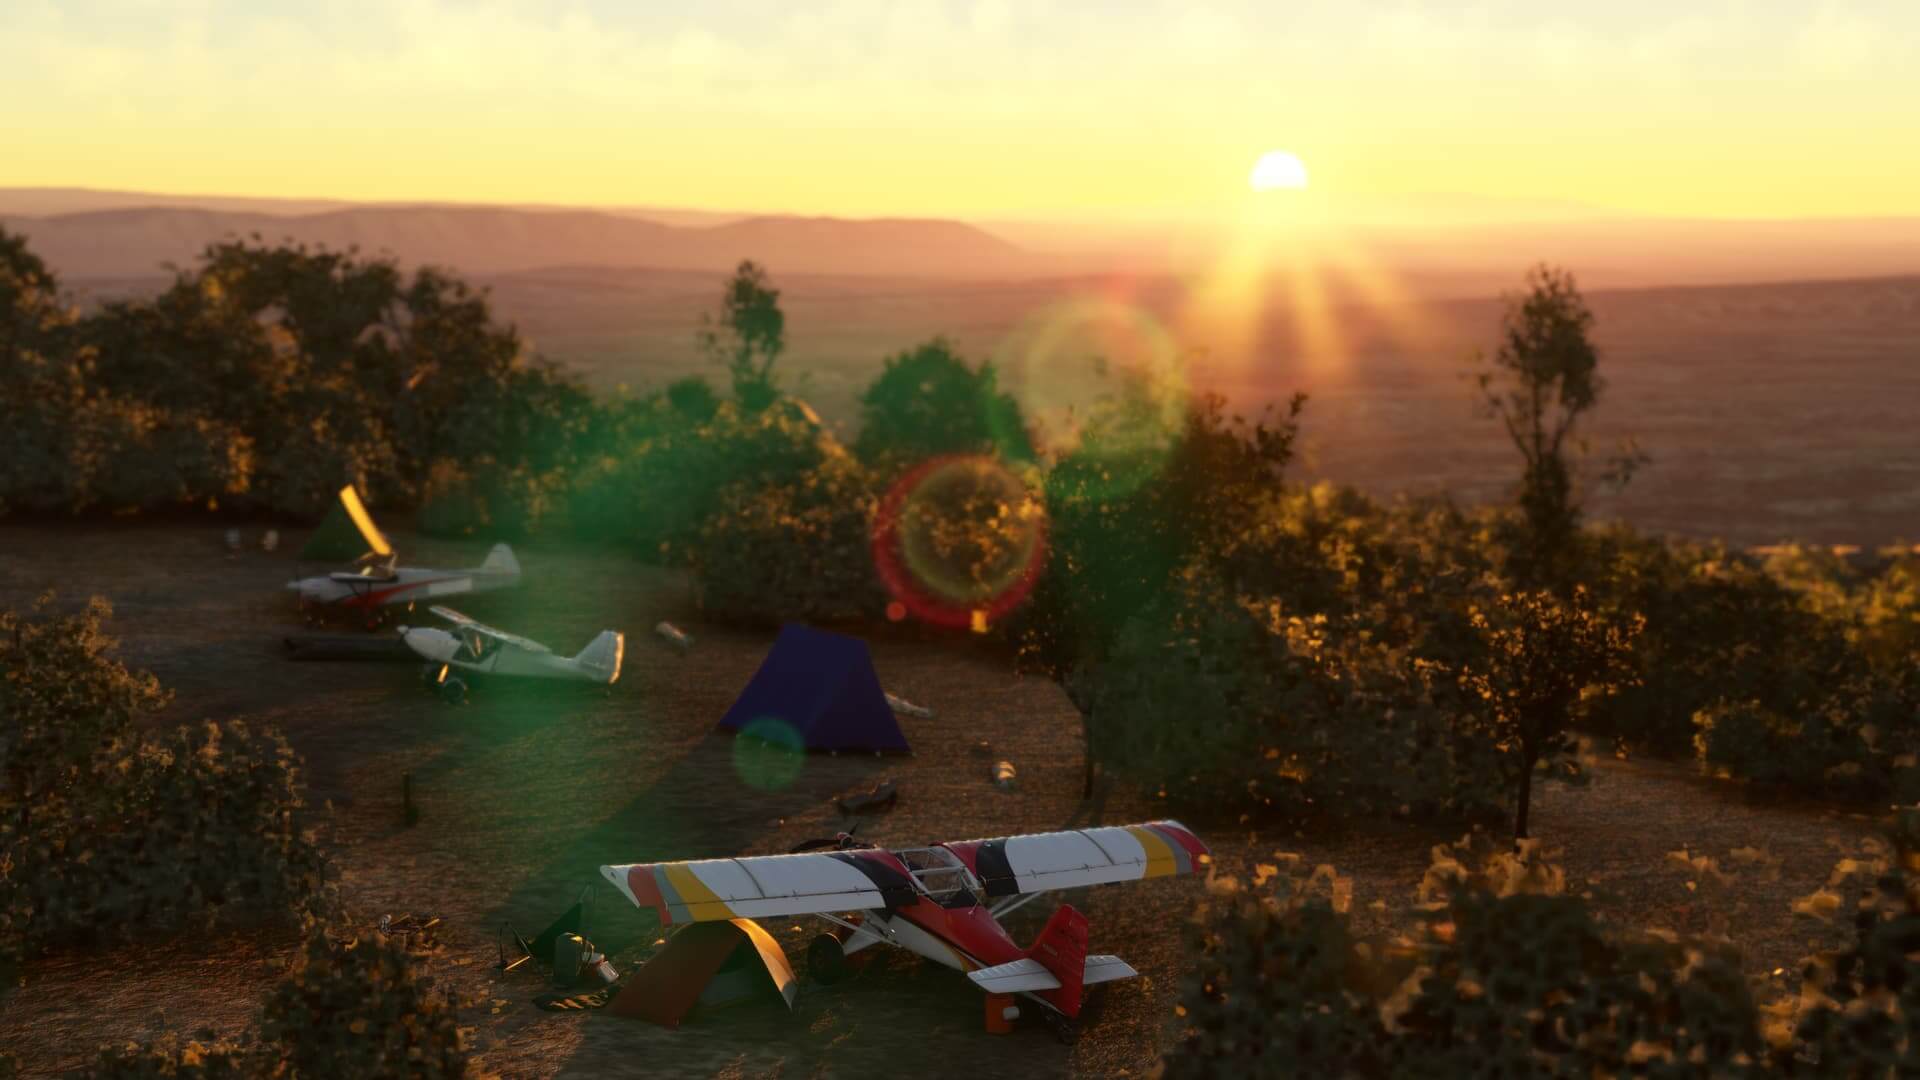 Aircraft camp out on a mountainside